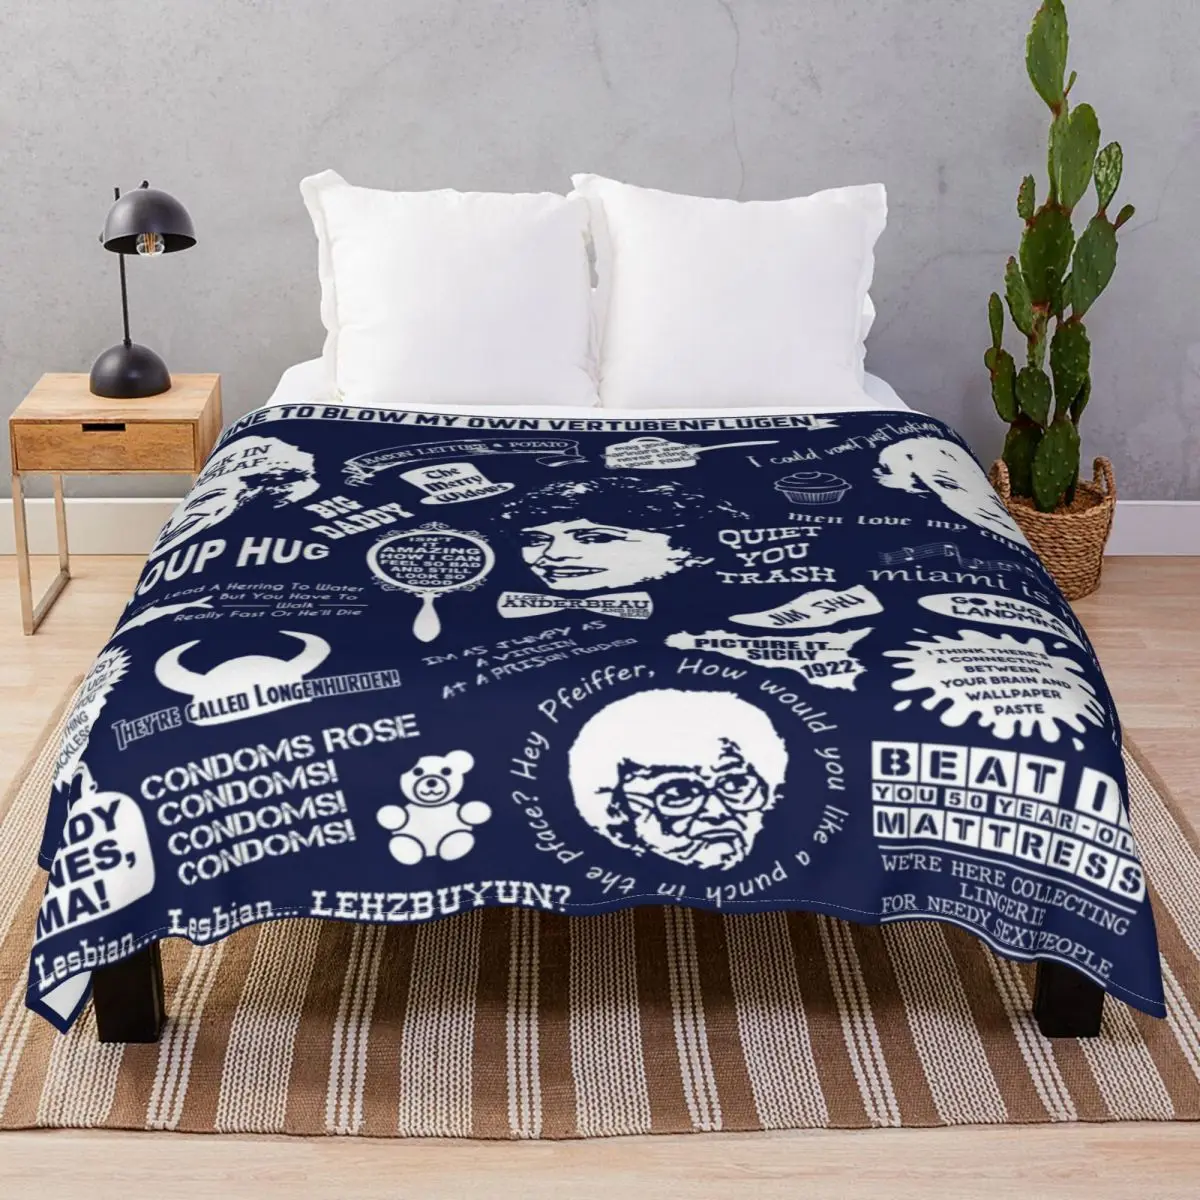 Thank You For Being A Friend Blankets Flannel Spring/Autumn Lightweight Throw Blanket for Bed Home Couch Camp Cinema